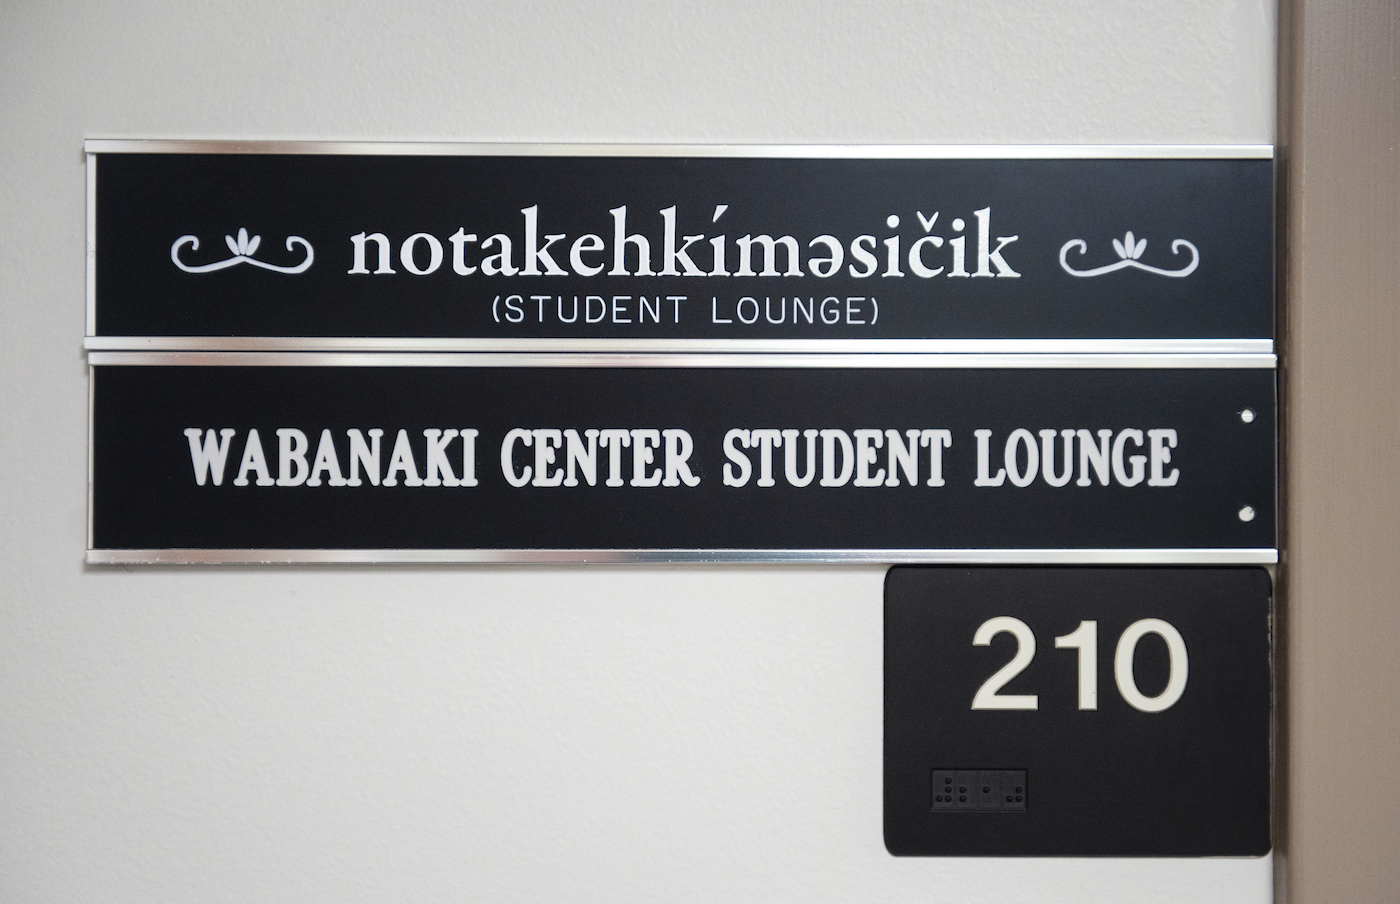 A photo of the sign outside of the Wabanaki Center Student Lounge